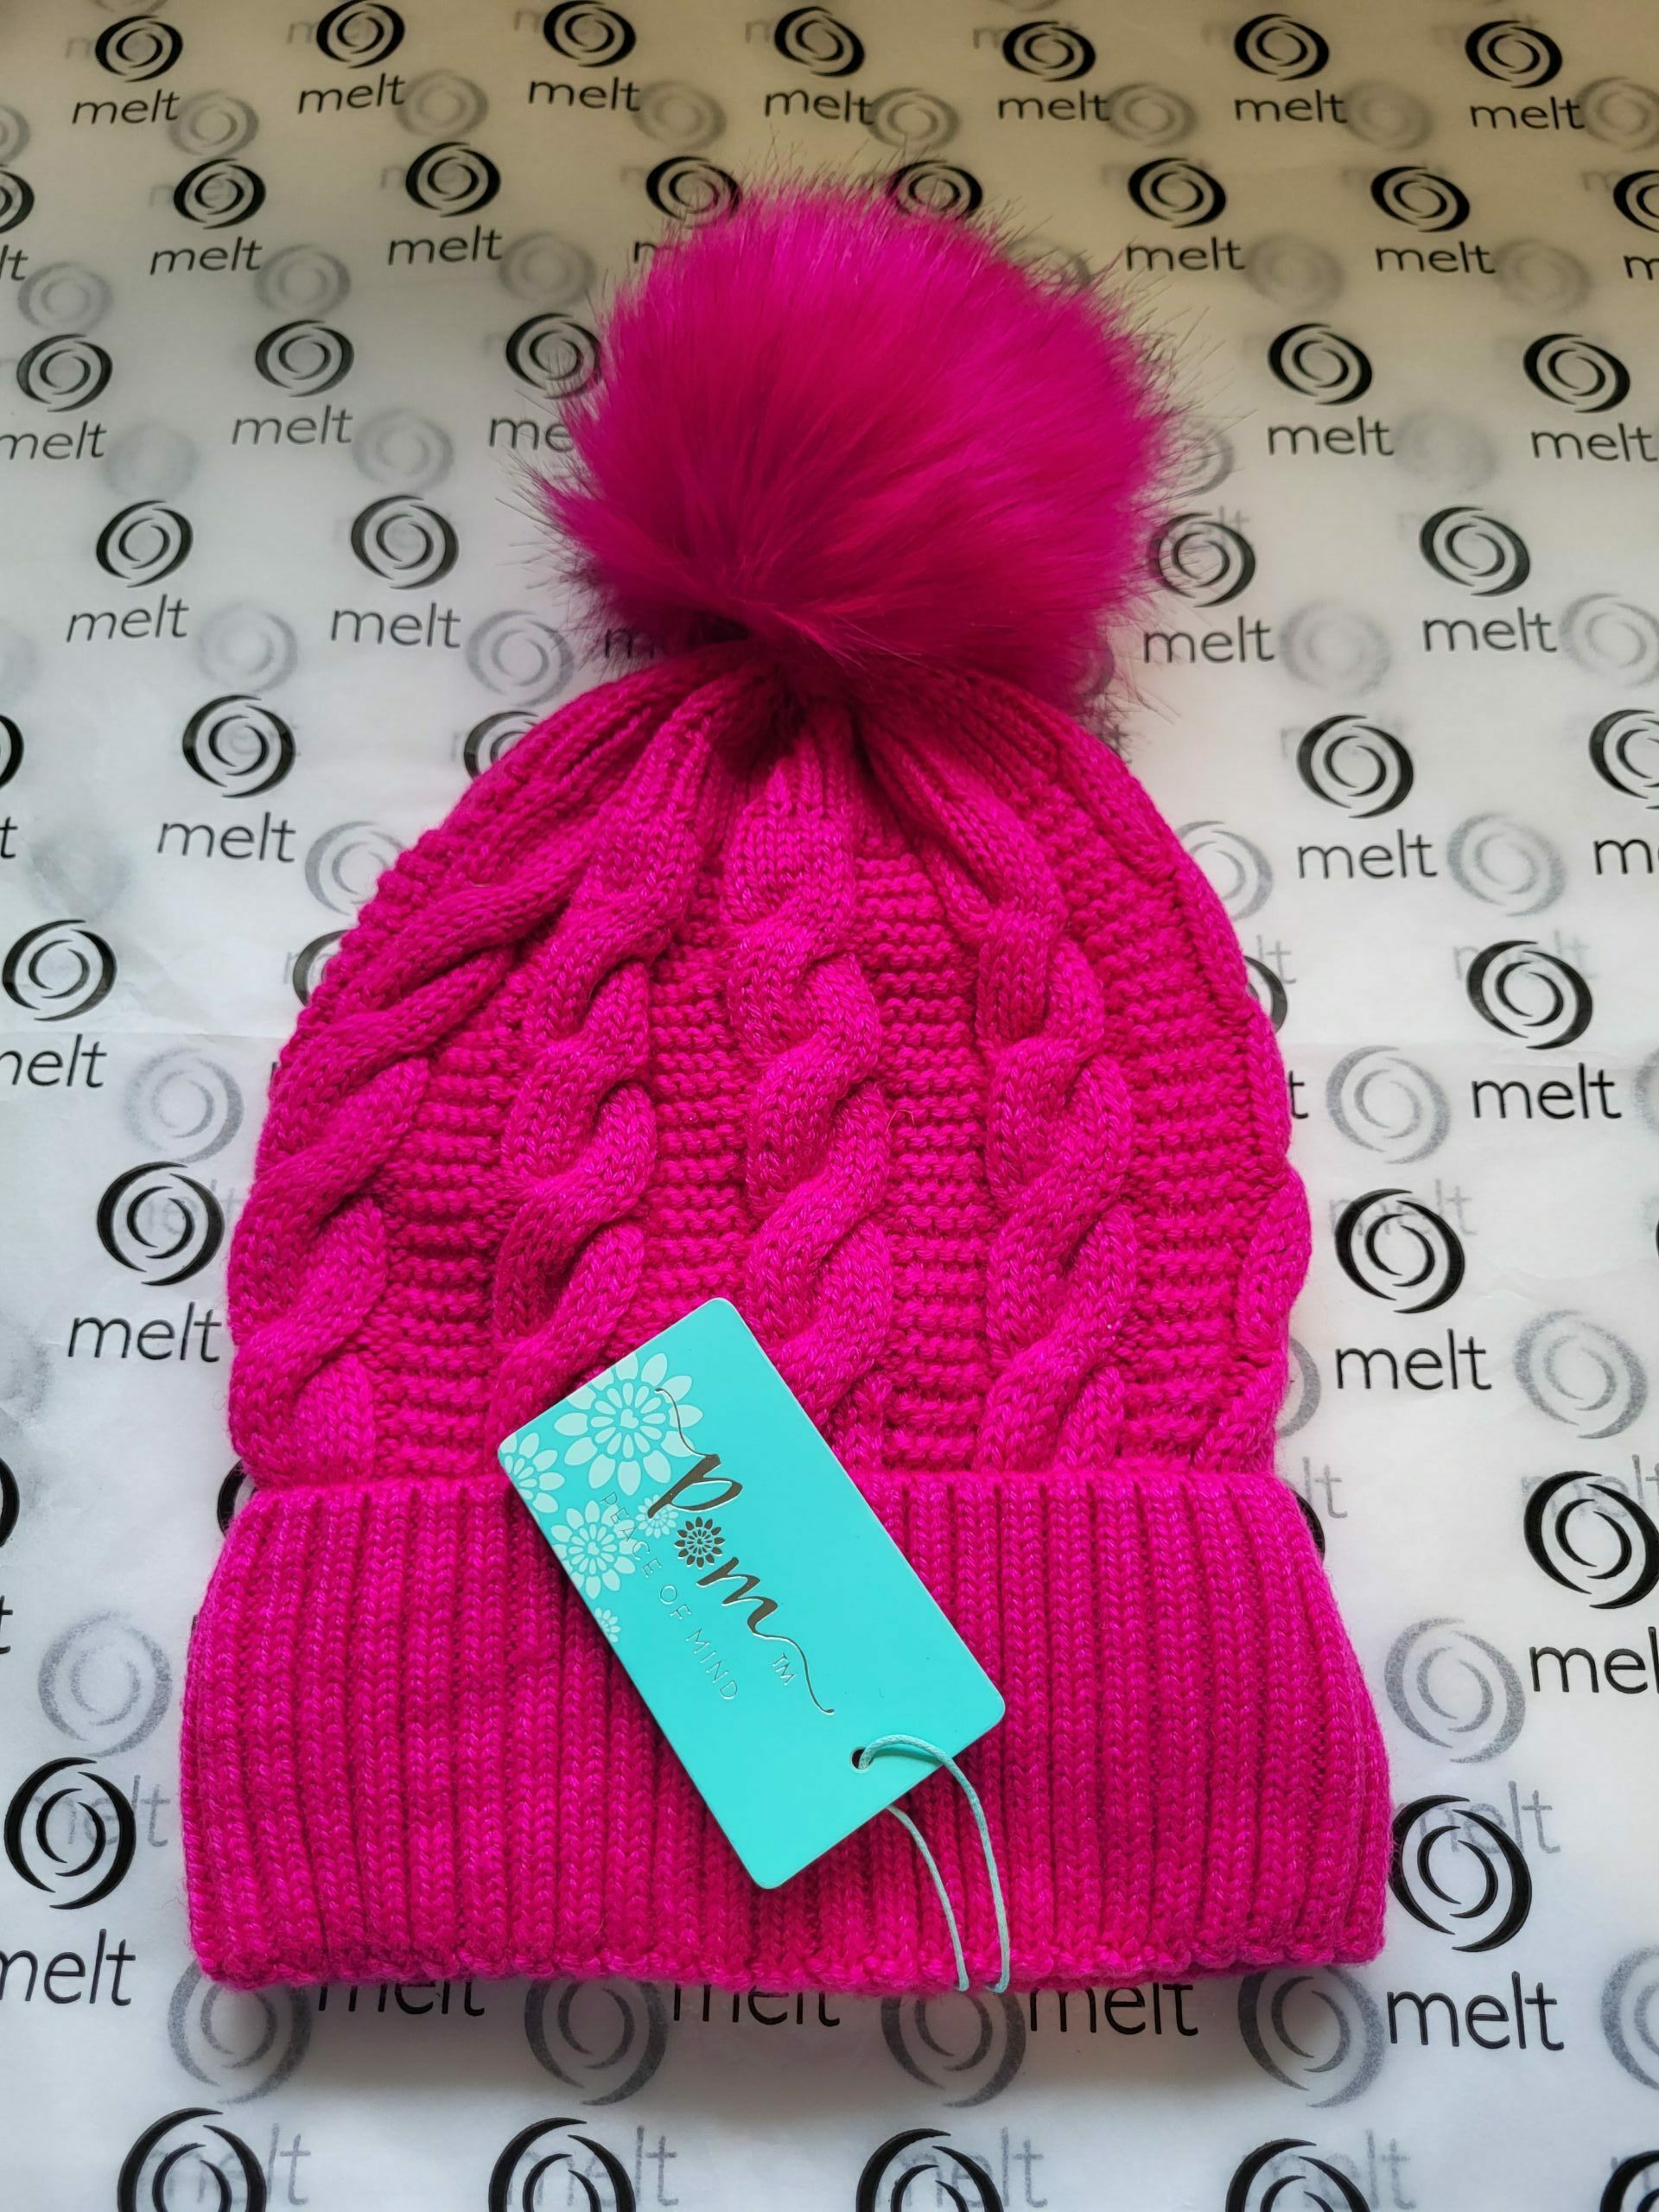 Gorgeous Bobble Hats by POM